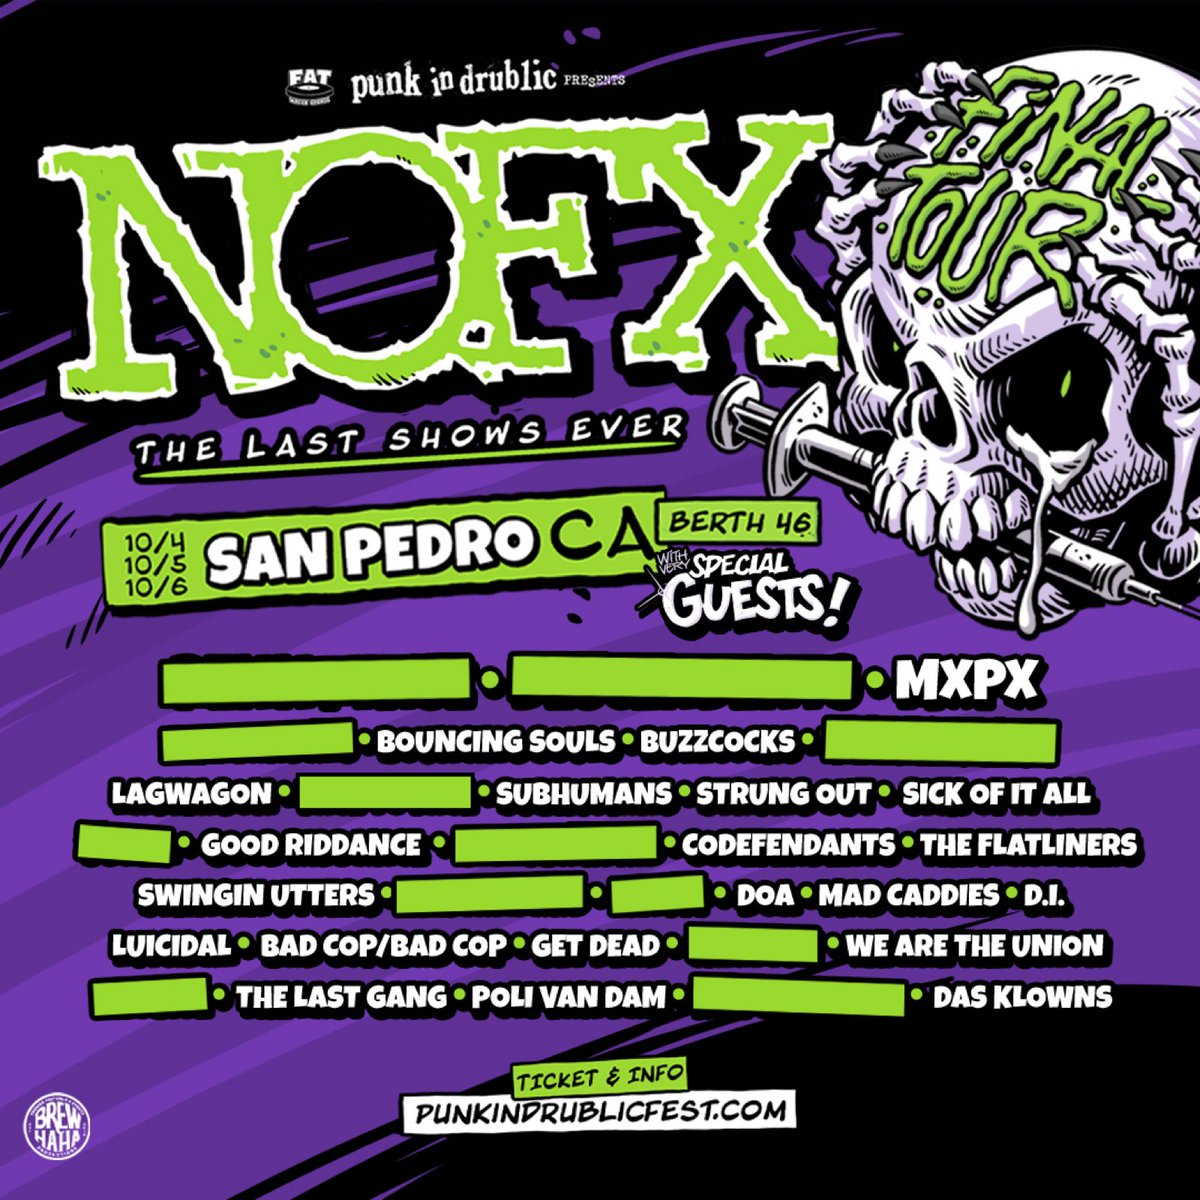 🚨SAN PEDRO🚨 SOOOOOO stoked to announce that we are a part of @nofx 's last weekend playing shows .... EVER!! Don't miss out on @punkindrublicfestival ! TICKETS ARE ON SALE NOW! See you there, friends! ✌🏽🖤 punkindrublicfest.com/losangeles #TheLastGang